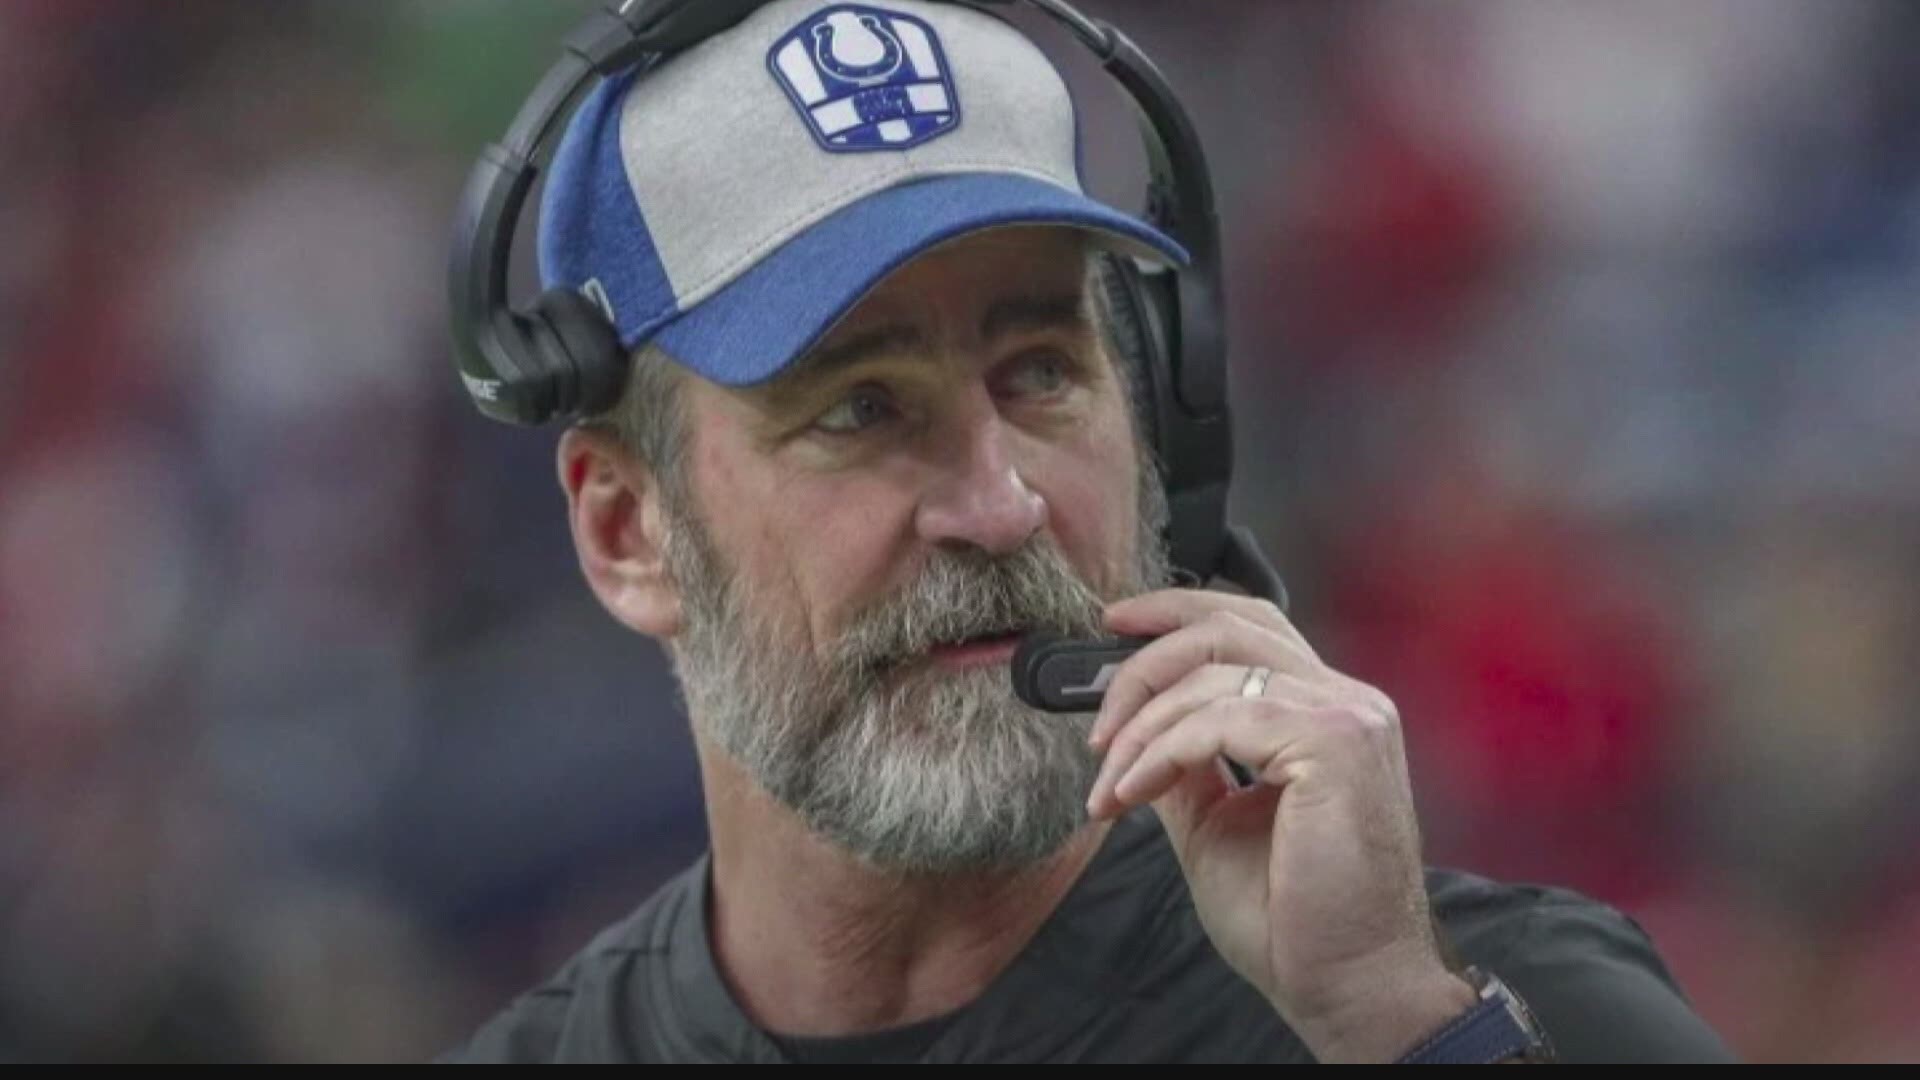 It’s a big blow to the Colts franchise as the team starts training camp - Coach Frank Reich's now out with covid. Practice begins on Wednesday.